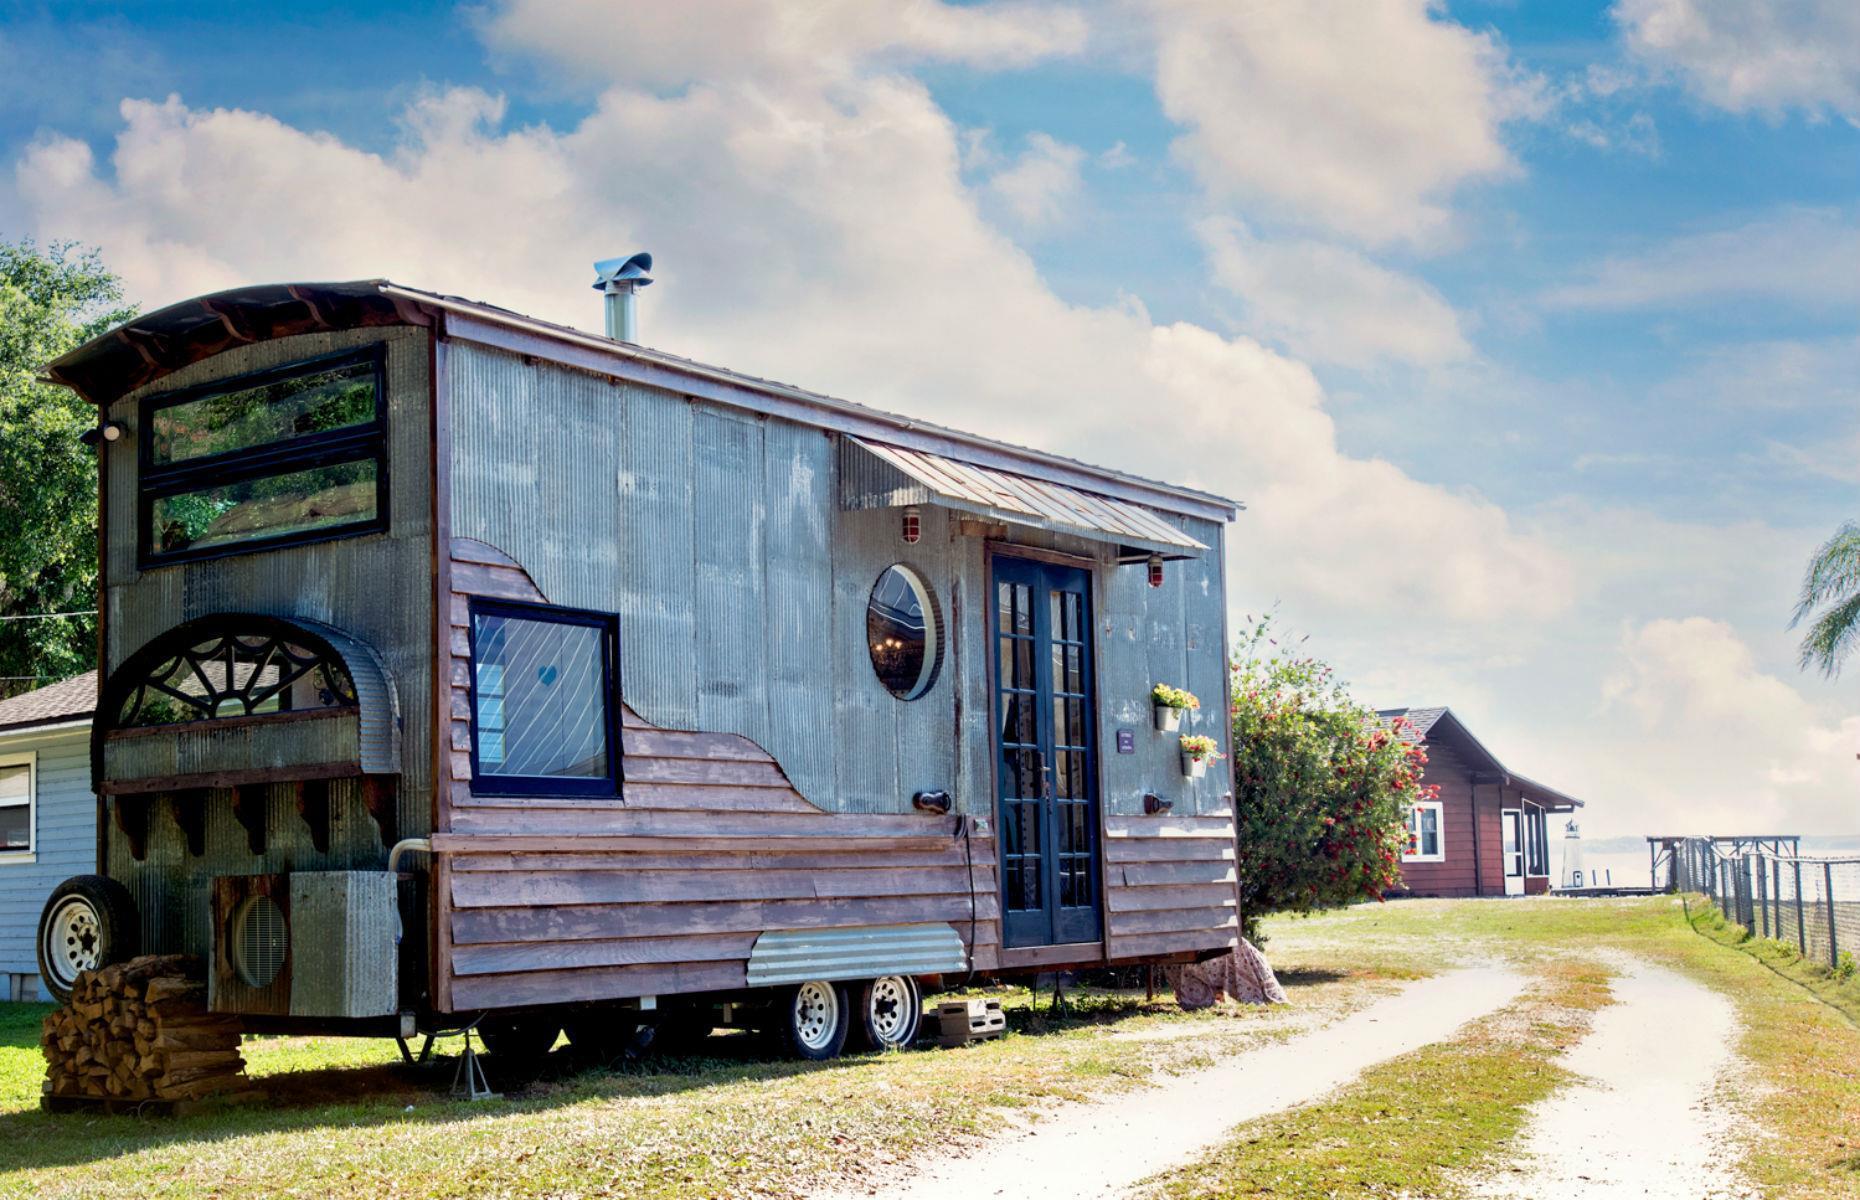 <p>Downsizing doesn't have to mean scrimping on style or creature comforts, as Rebekah and Robert Sofia prove with their stunning DIY tiny home. The 221-square-foot 'wagon on wheels,' named the <a href="https://www.loveproperty.com/gallerylist/72060/how-a-couple-built-their-tiny-house-on-wheels-for-15k">Gypsy Mermaid</a>, was made for just $15,000 and is utterly charming – not to mention full to bursting with gorgeous interior design details.</p>